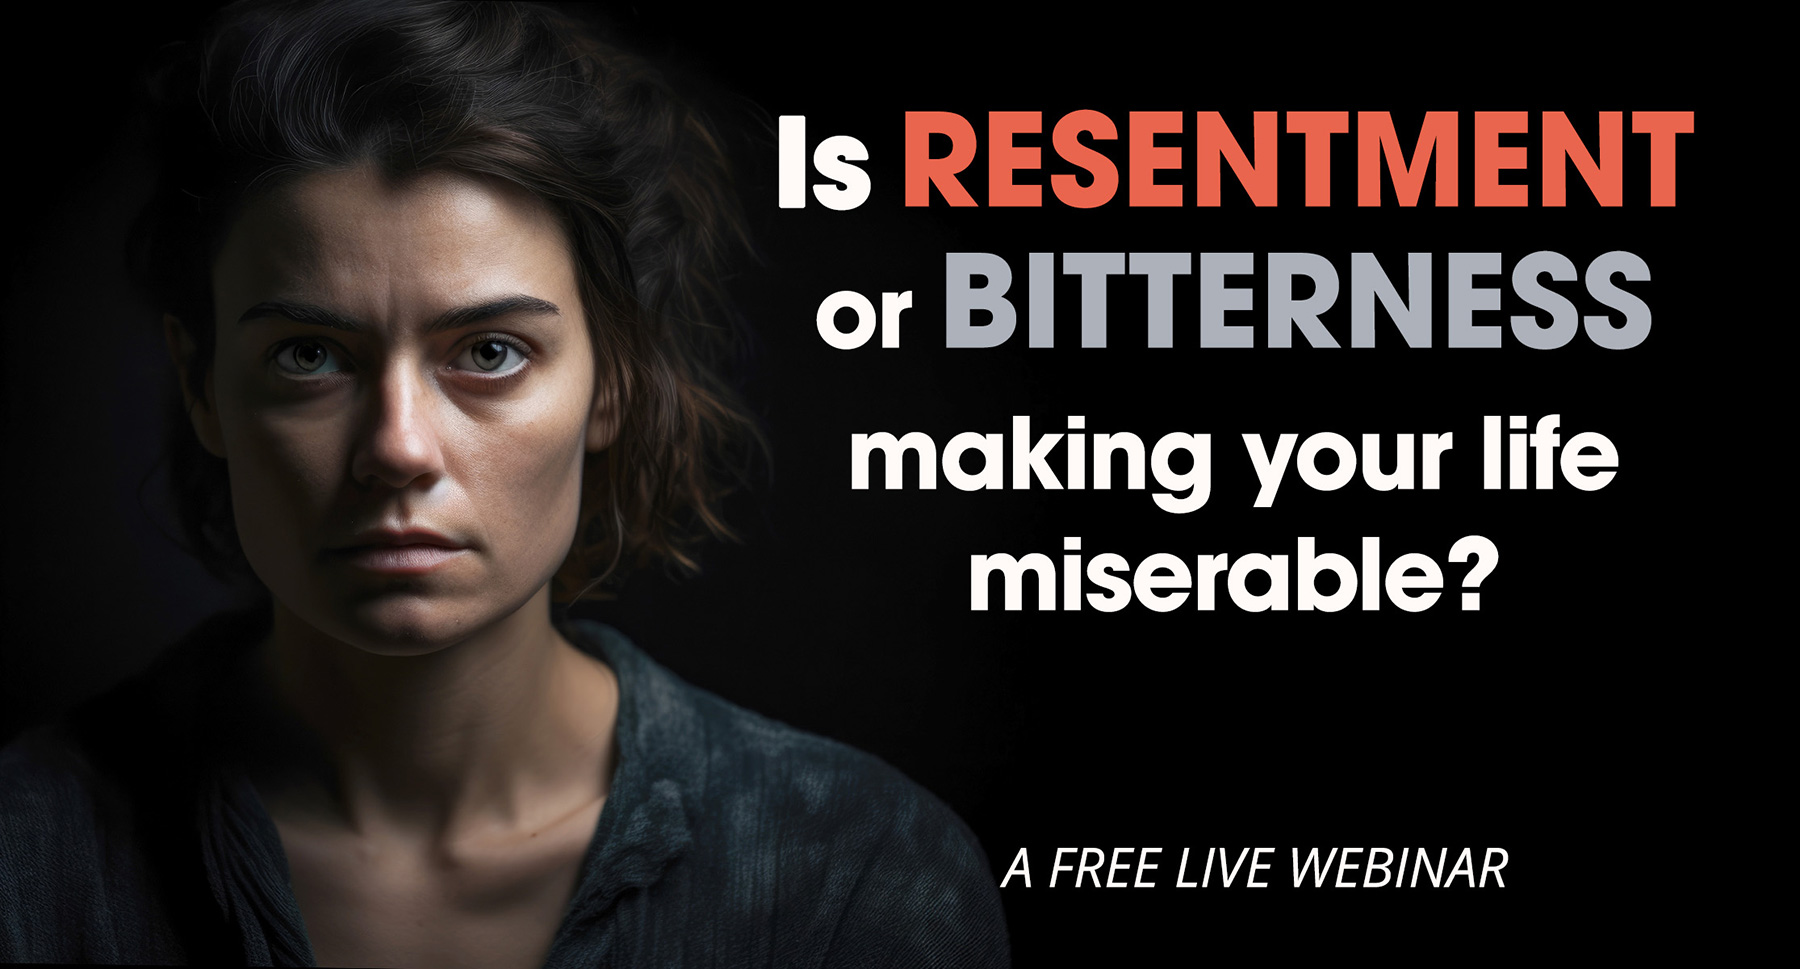 Is Resentment or Bitterness Making Your Life Miserable?